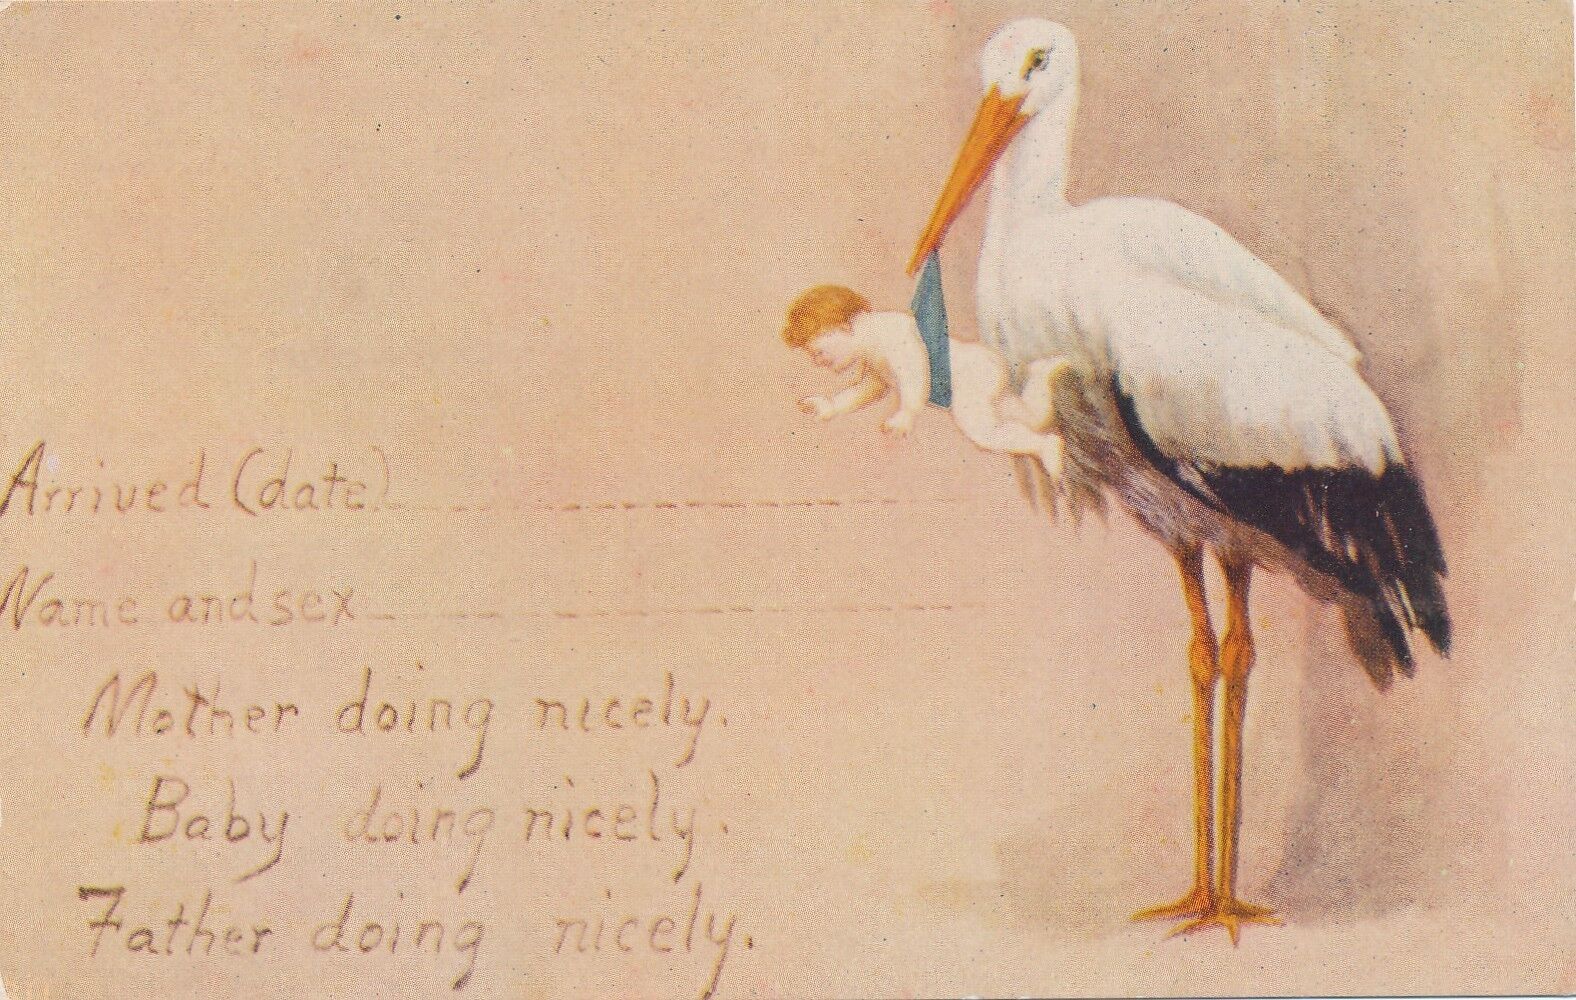 Stork and Everyone Doing Nicely Birth Announcement Postcard